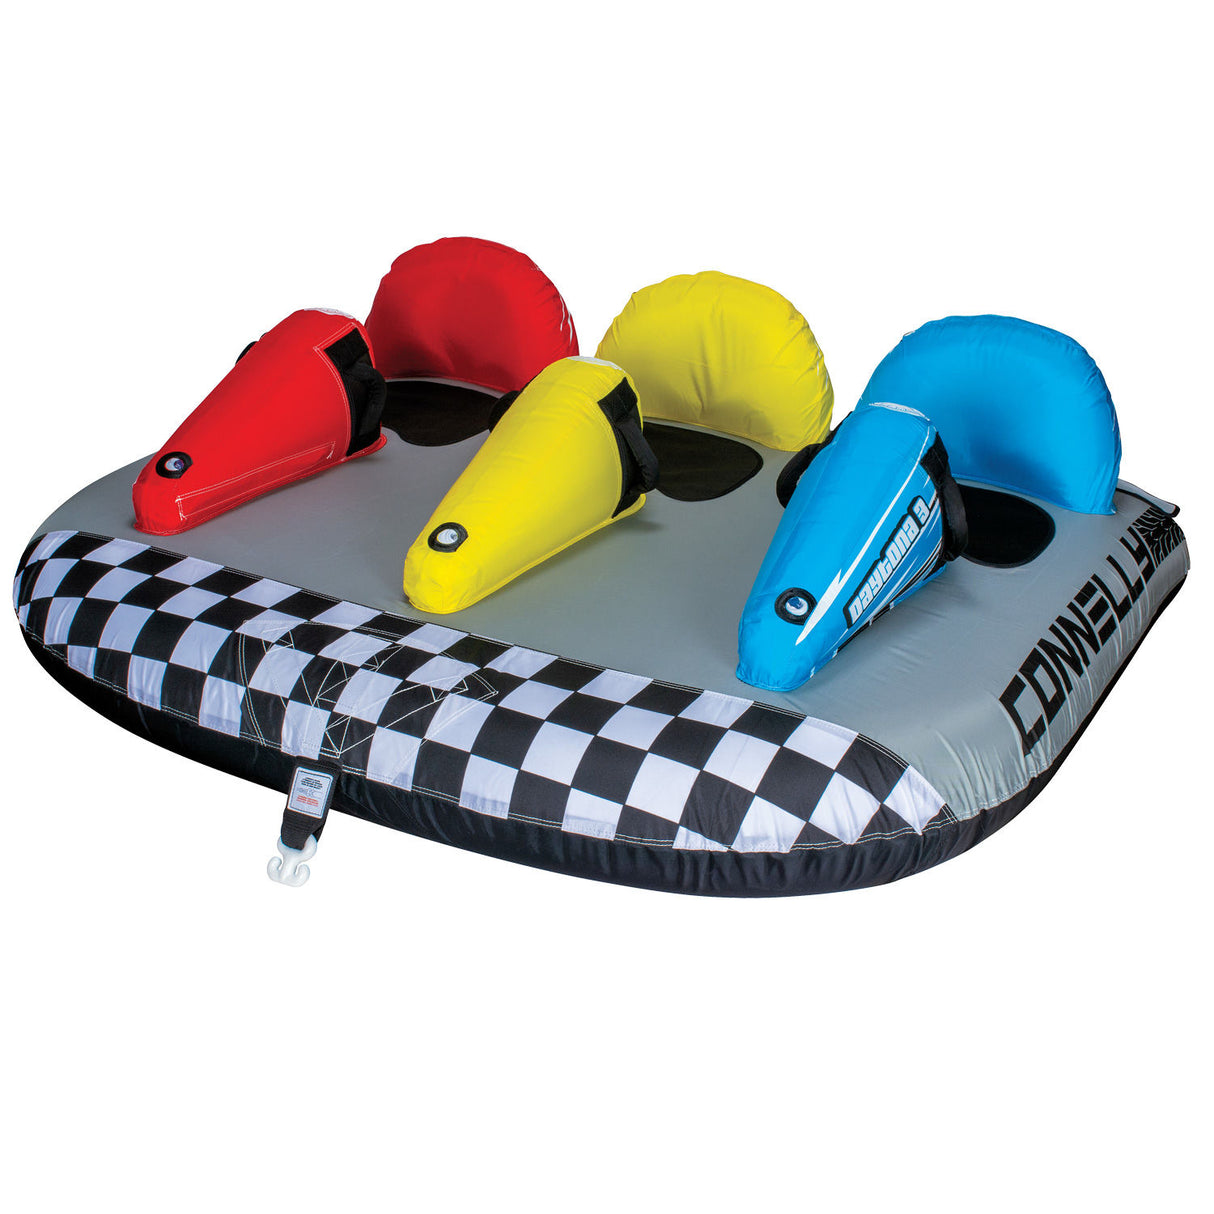 Connelly Daytona 3 Person Towable Tube